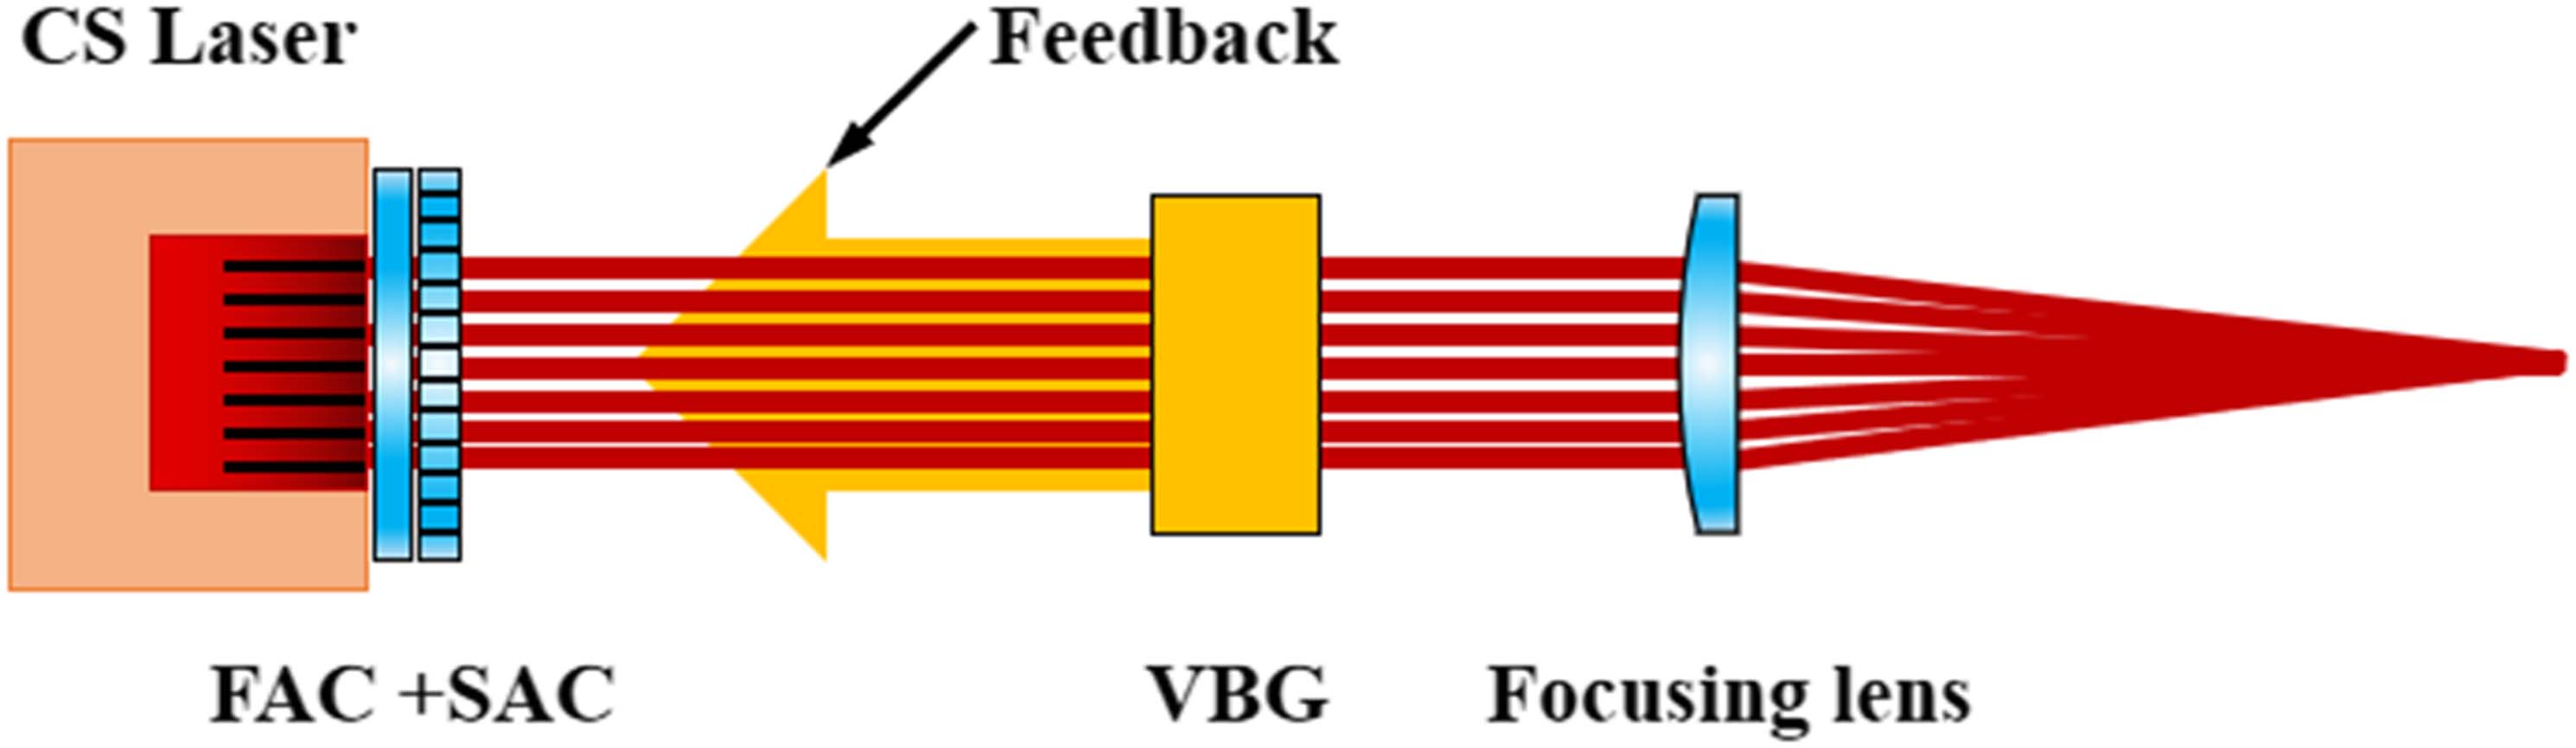 External cavity feedback structure diagram based on FAC + SAC + VBG.